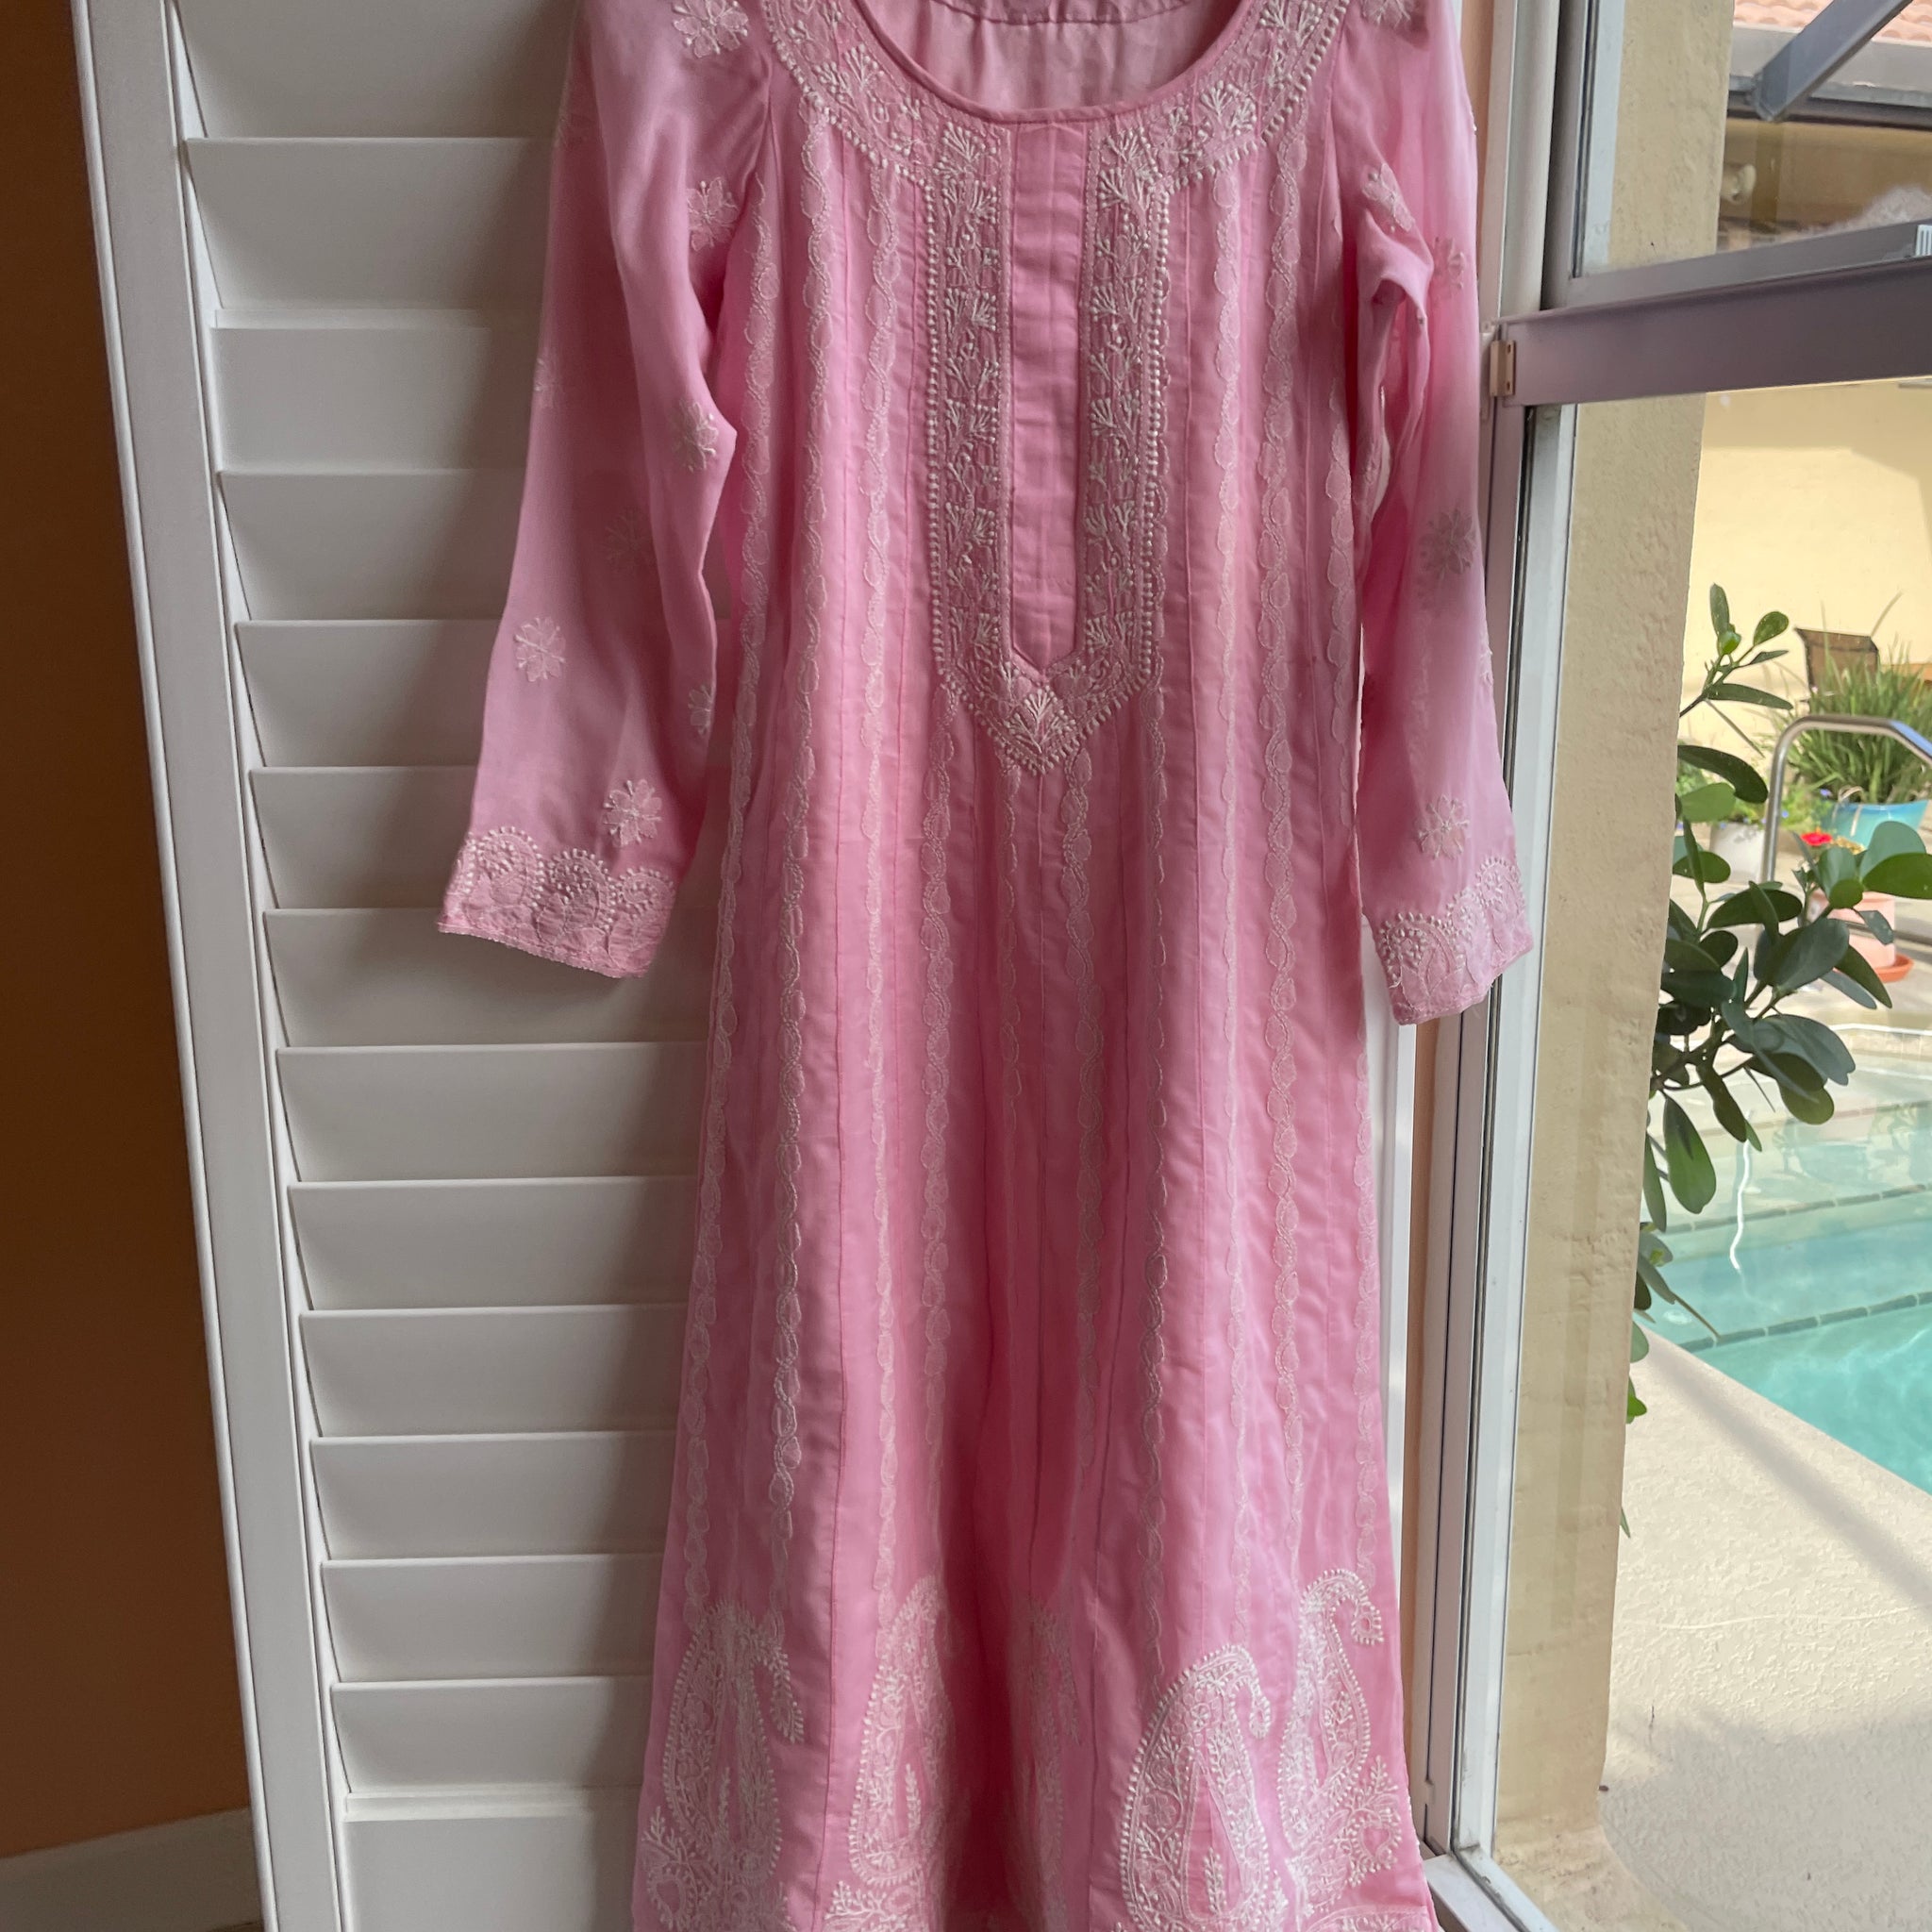 90s pink embroidery tunic dress